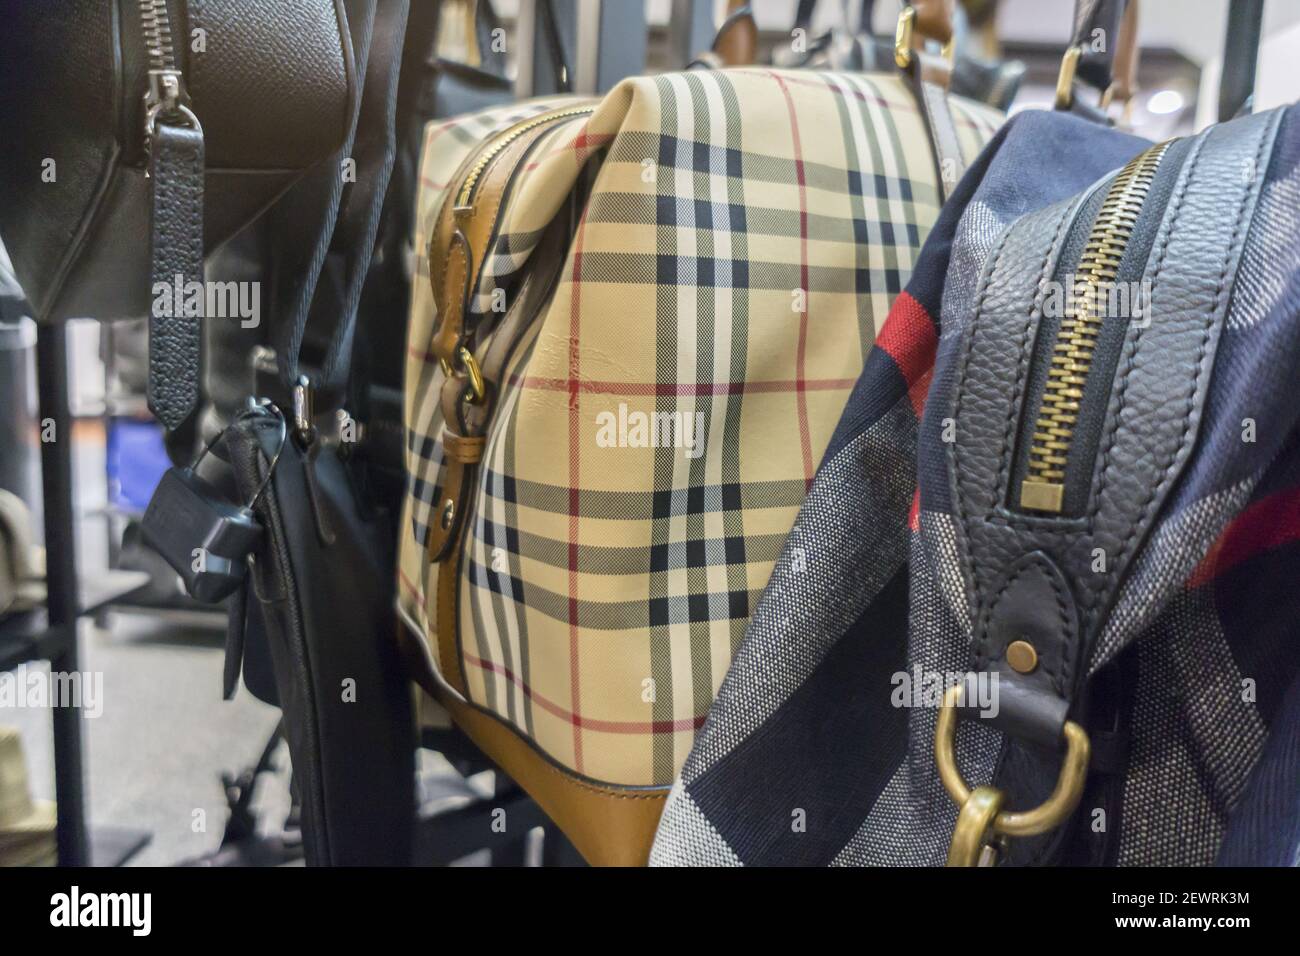 Burberry designer bags on sale at the Saks Fifth Avenue Off Fifth discount  spin-off brand in New York, seen on Sunday, March 6, 2016. Burberry is  suing Target alleging that the retailer